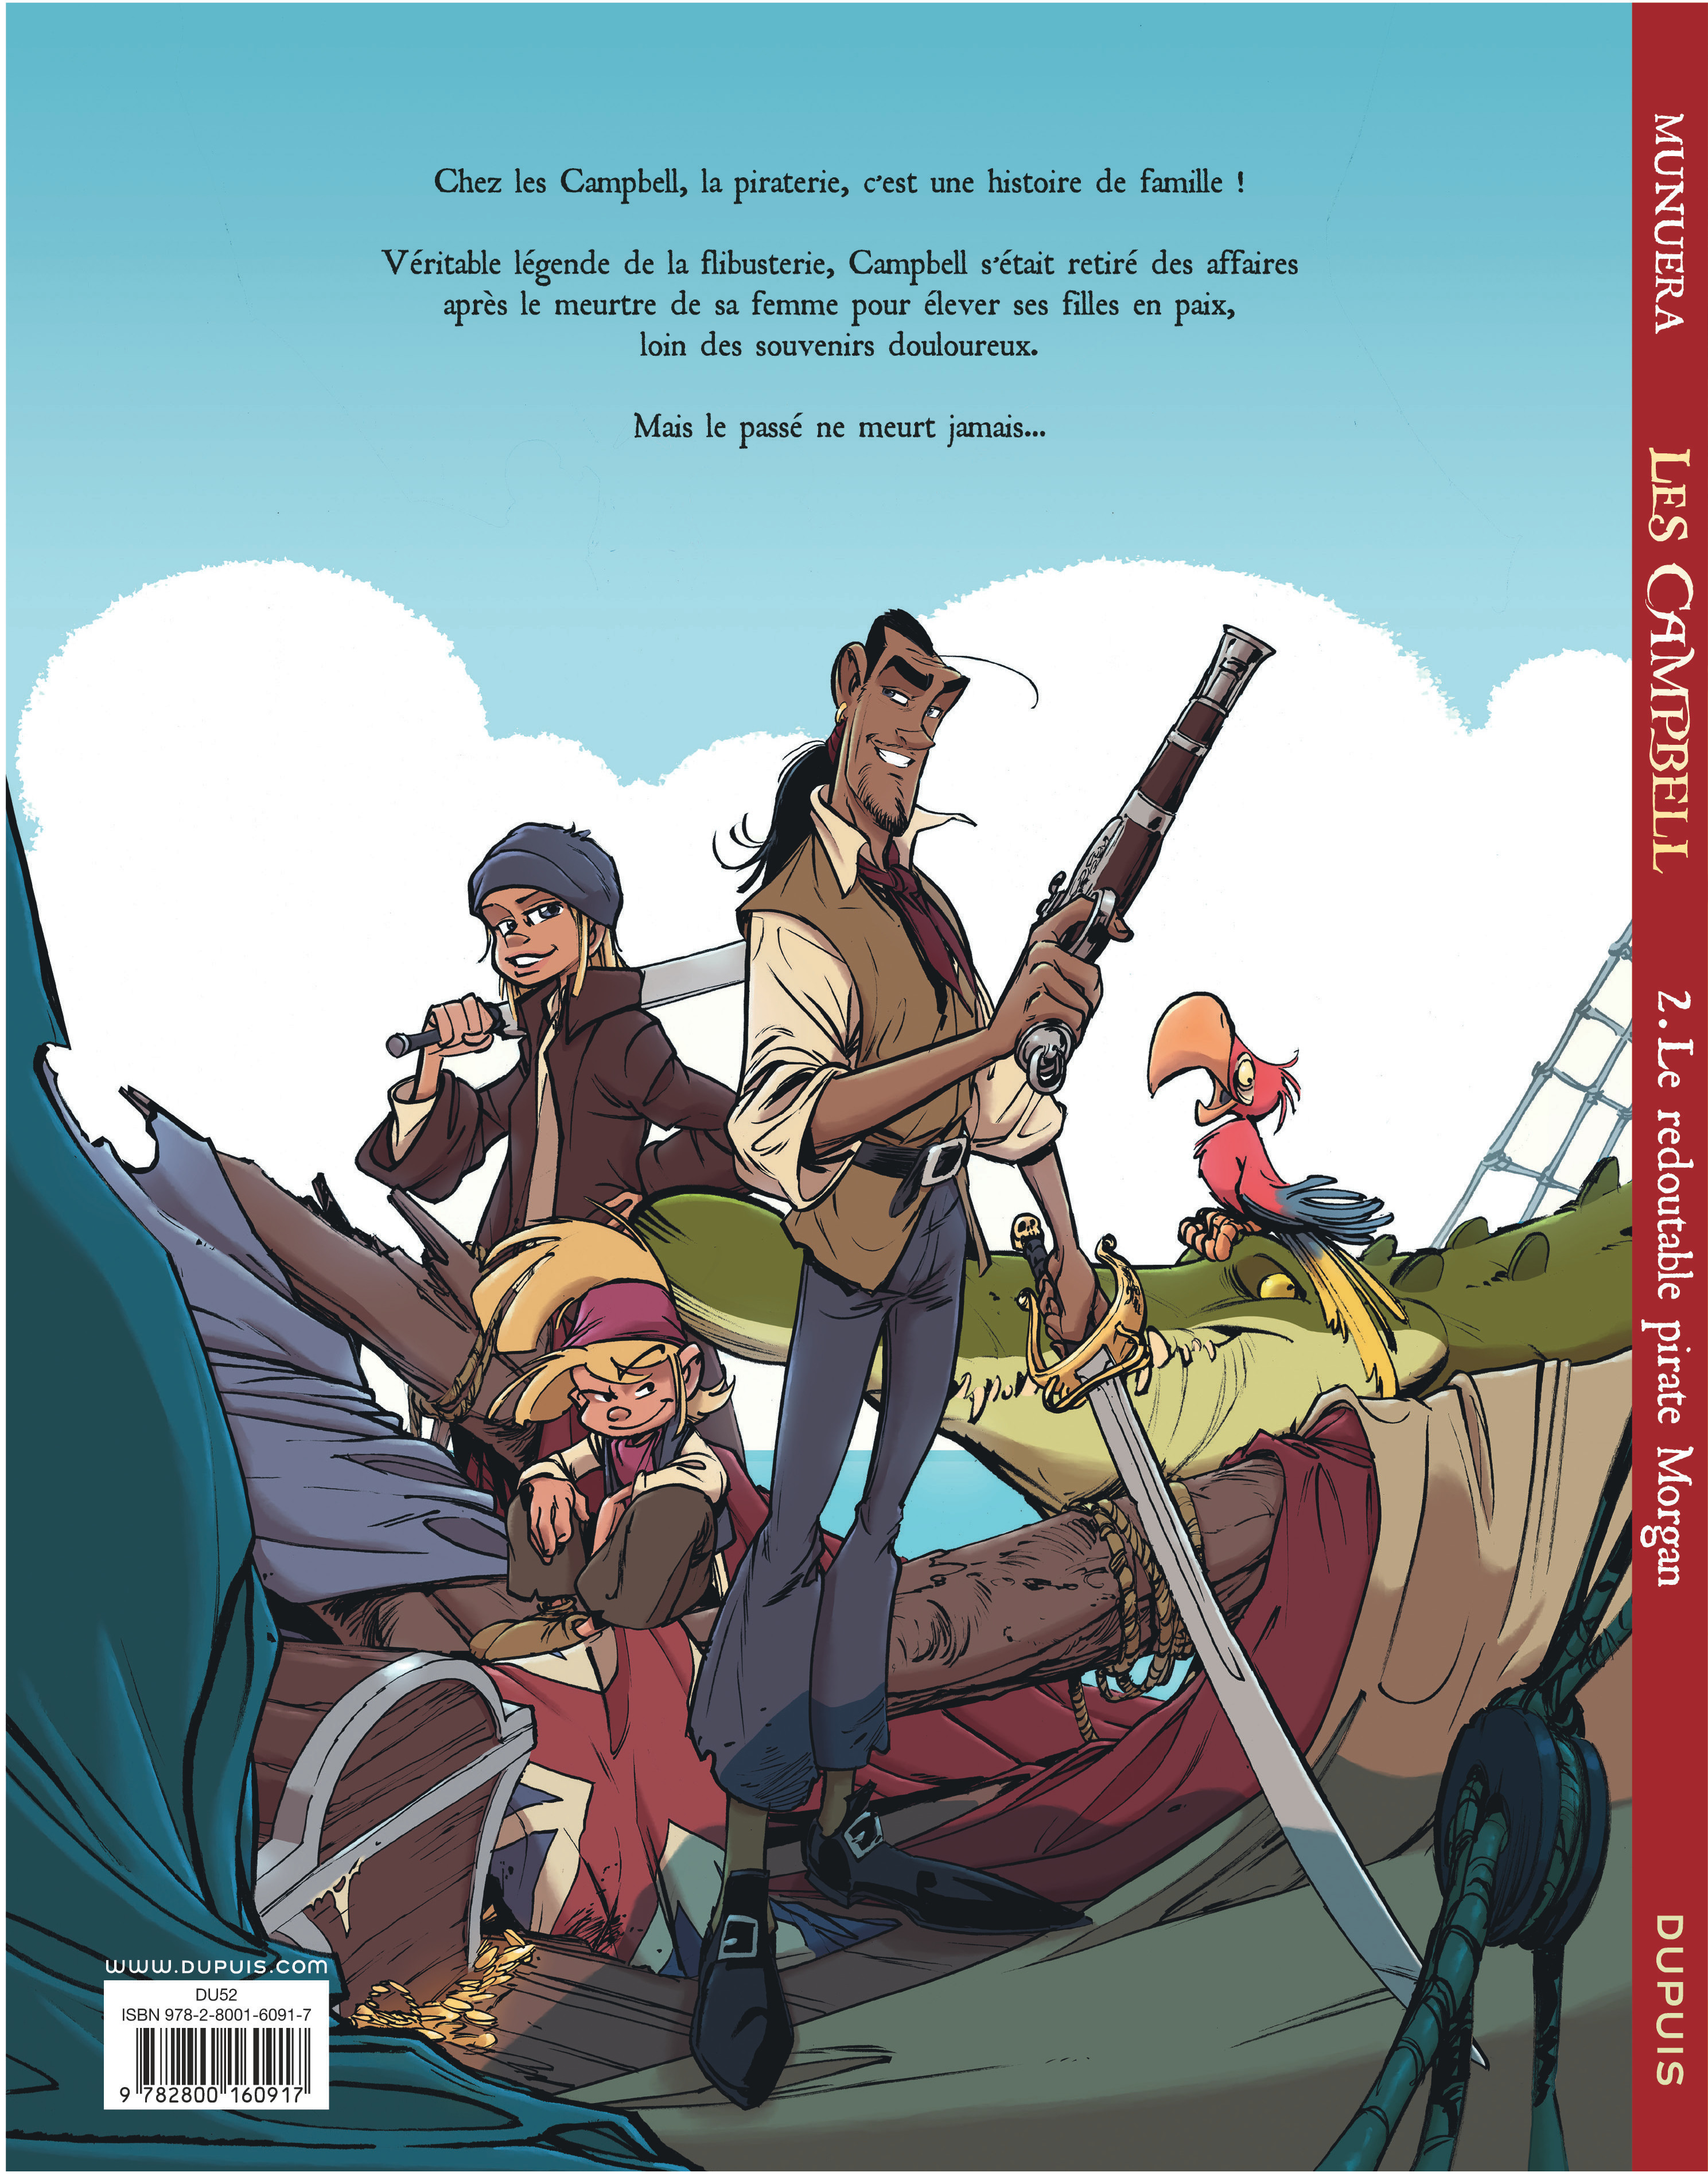 Les Campbell – Tome 2 – Le redoutable pirate Morgan - 4eme